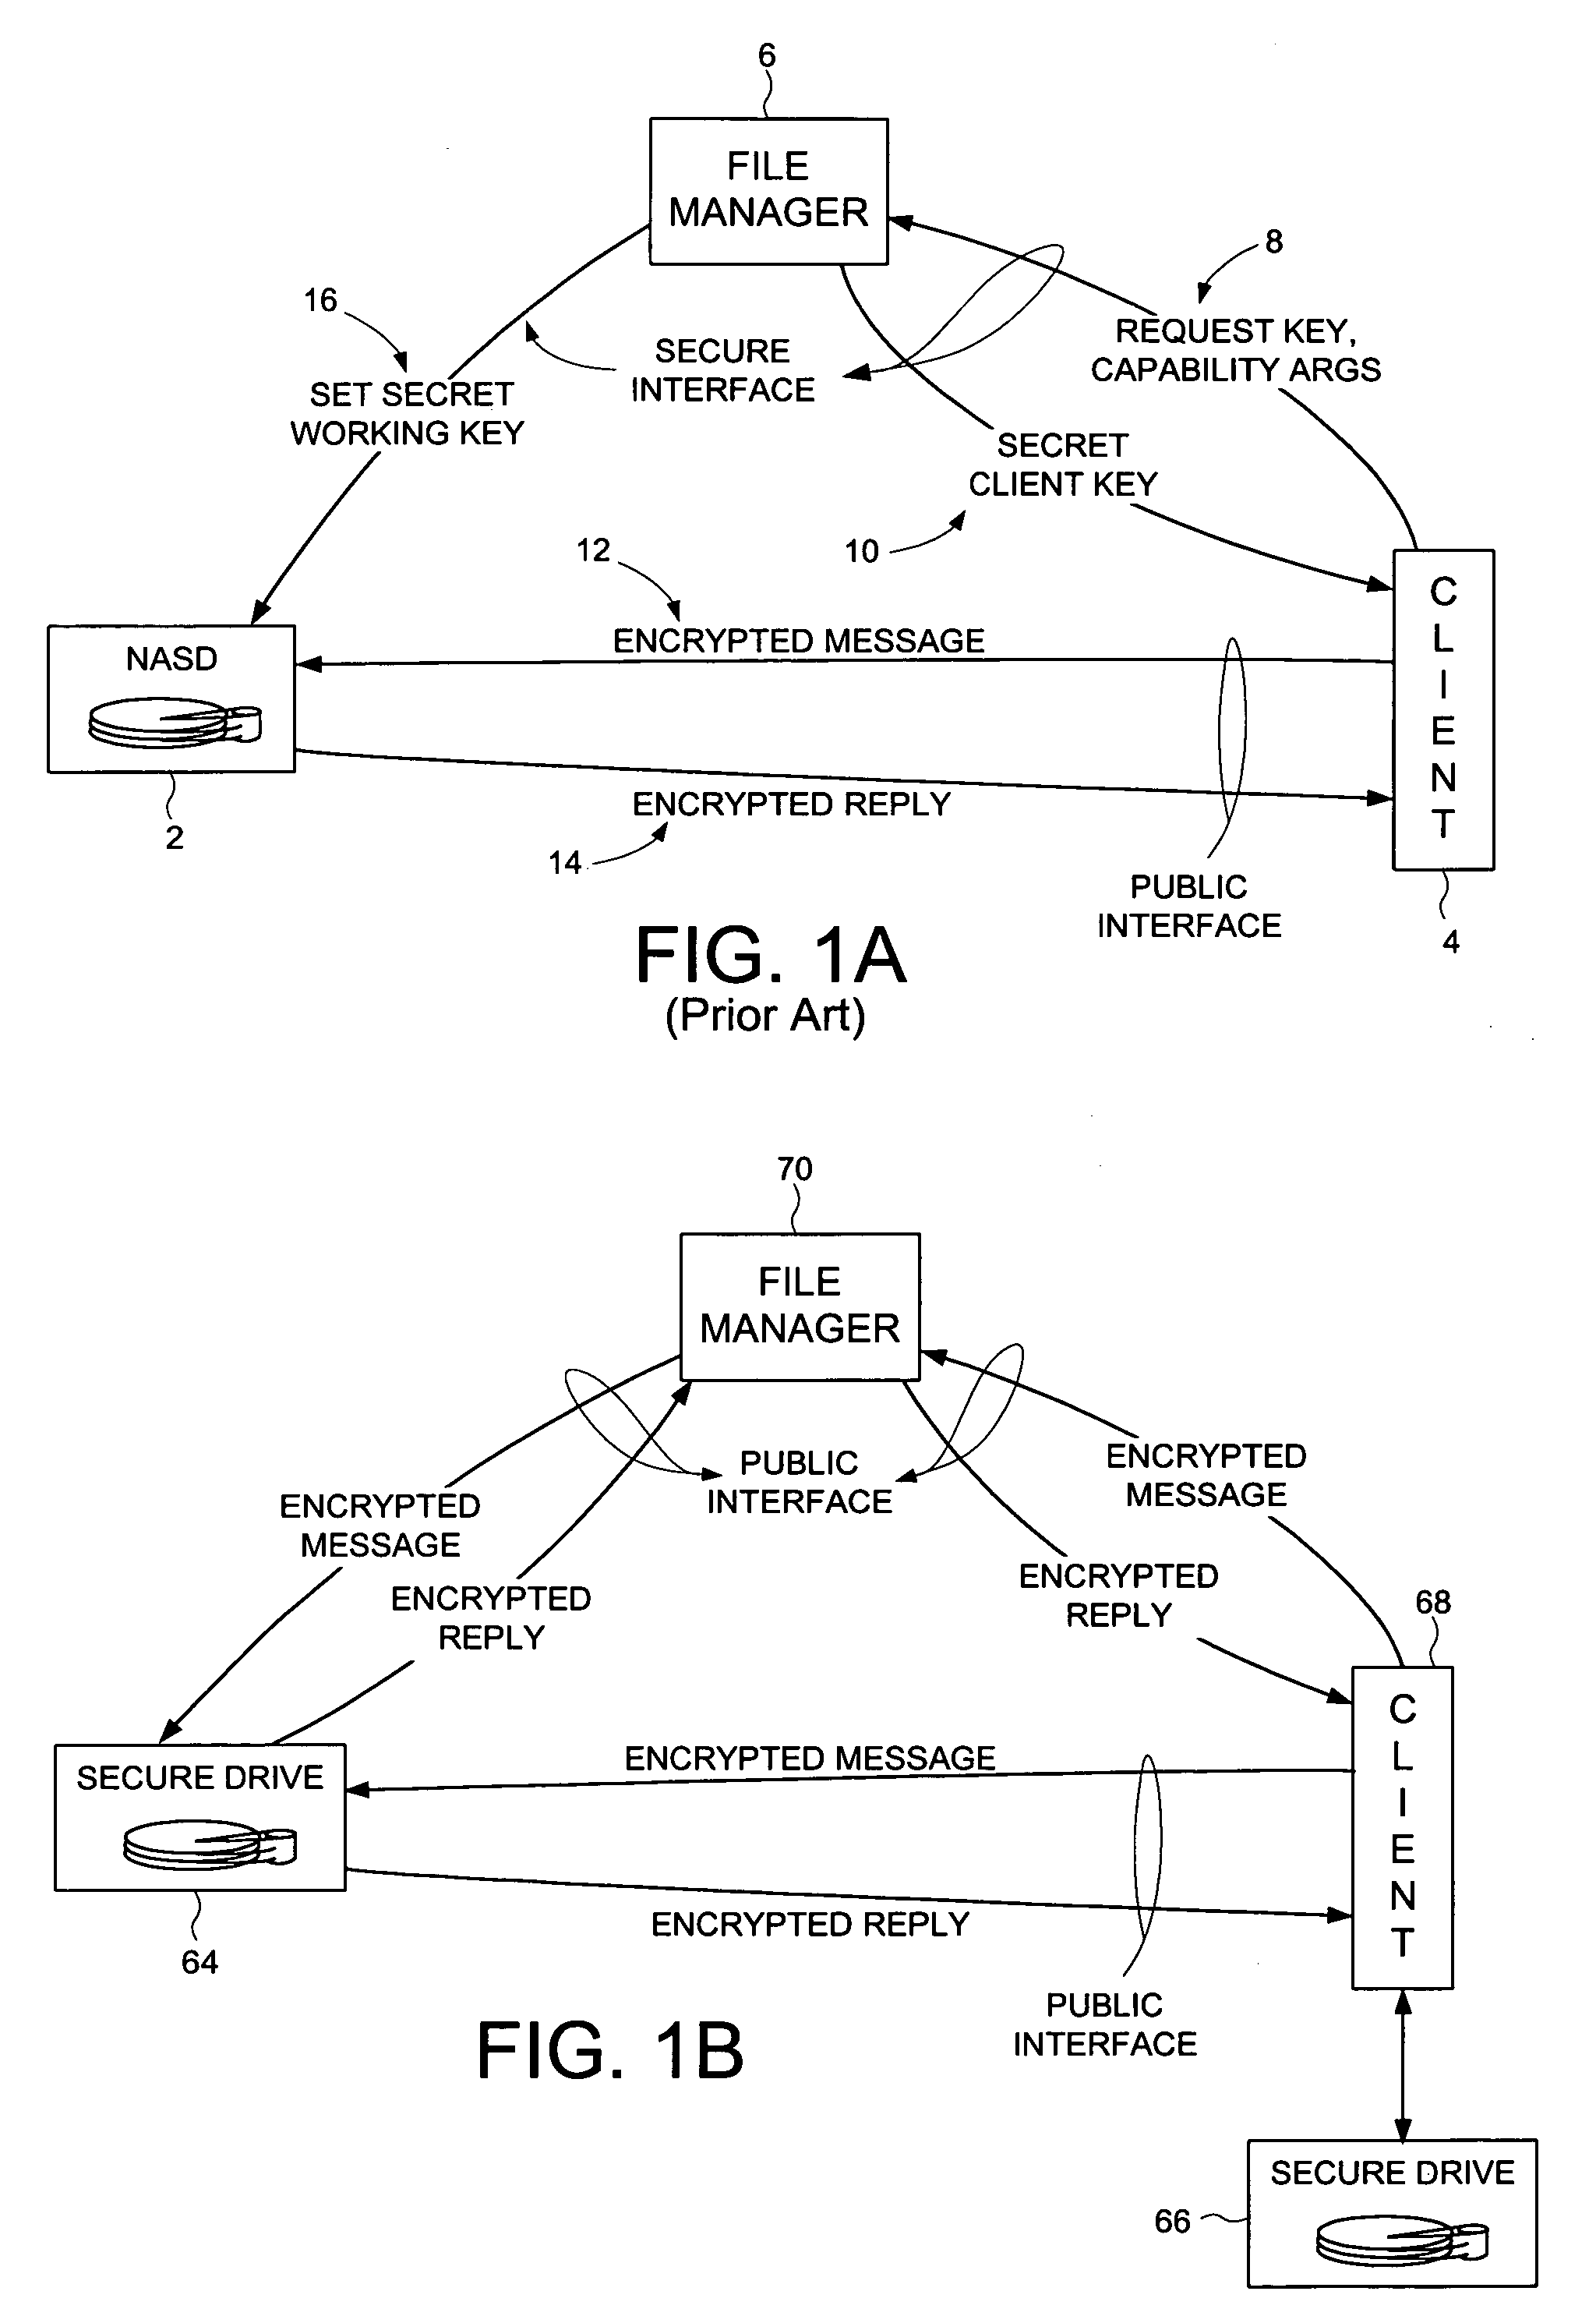 Secure disk drive comprising a secure drive key and a drive ID for implementing secure communication over a public network